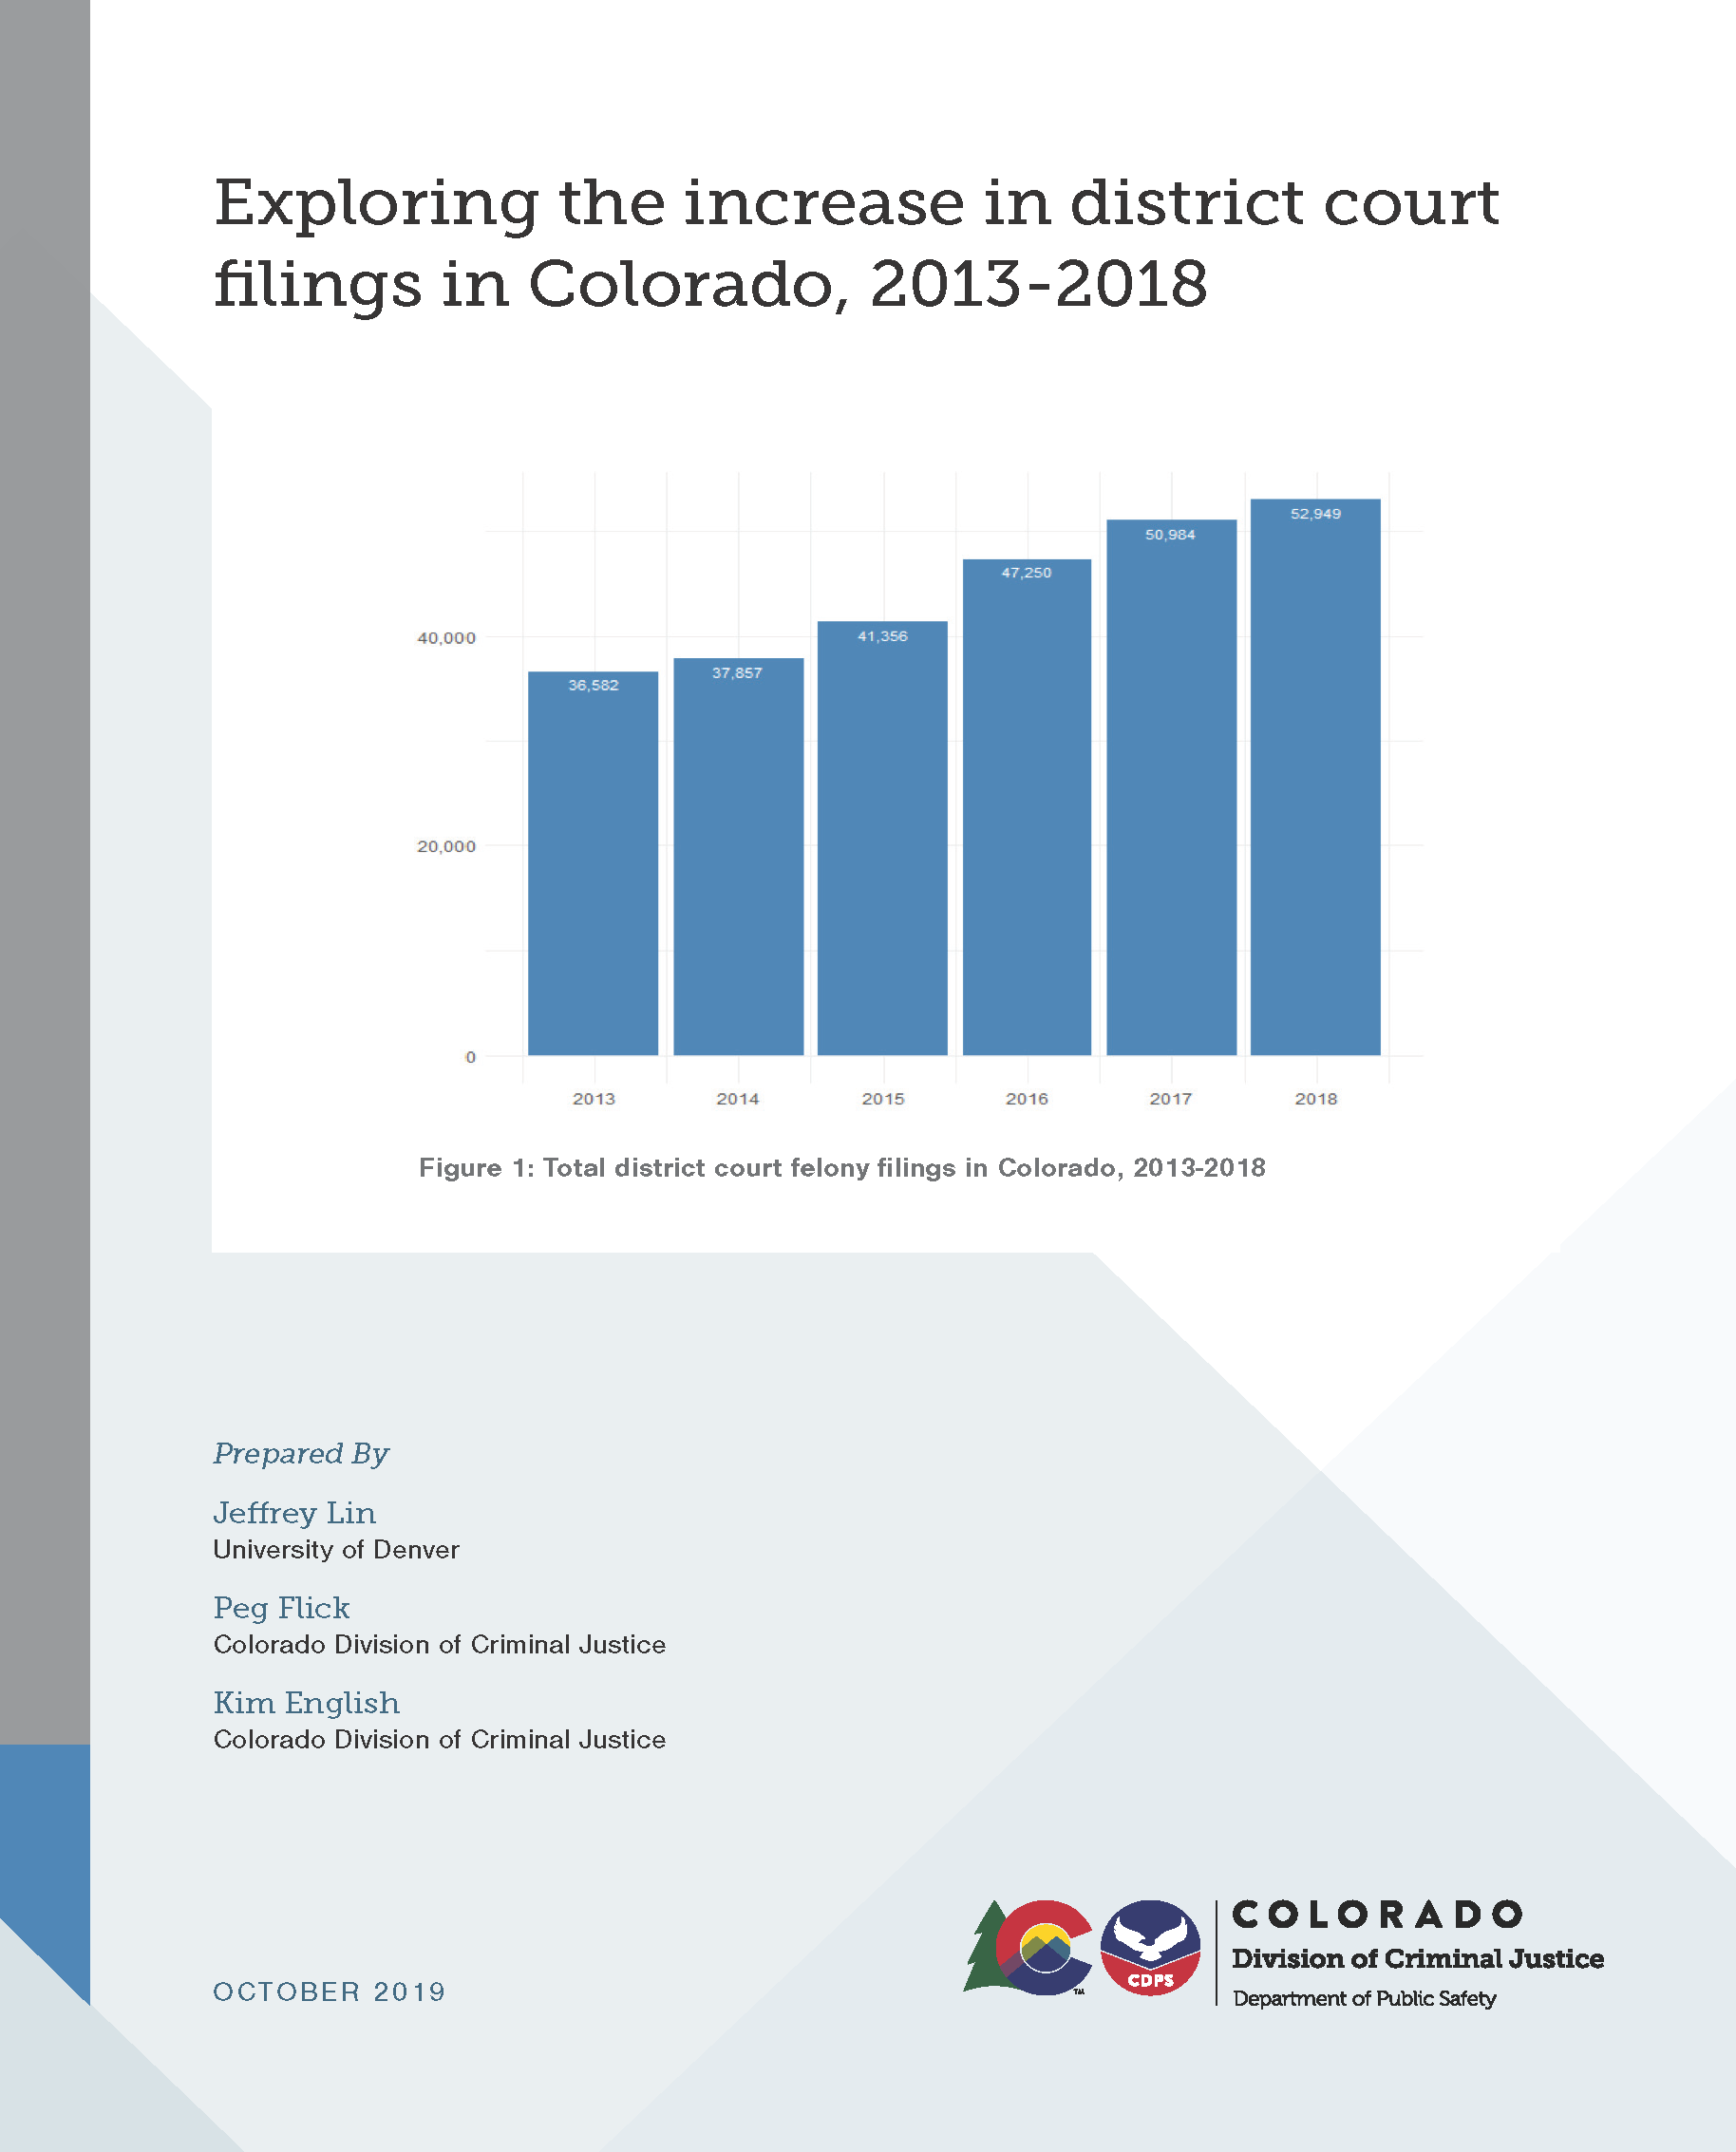 Exploring the Increase in District Court Filings in Colorado, 2013-2018 (October 2019)